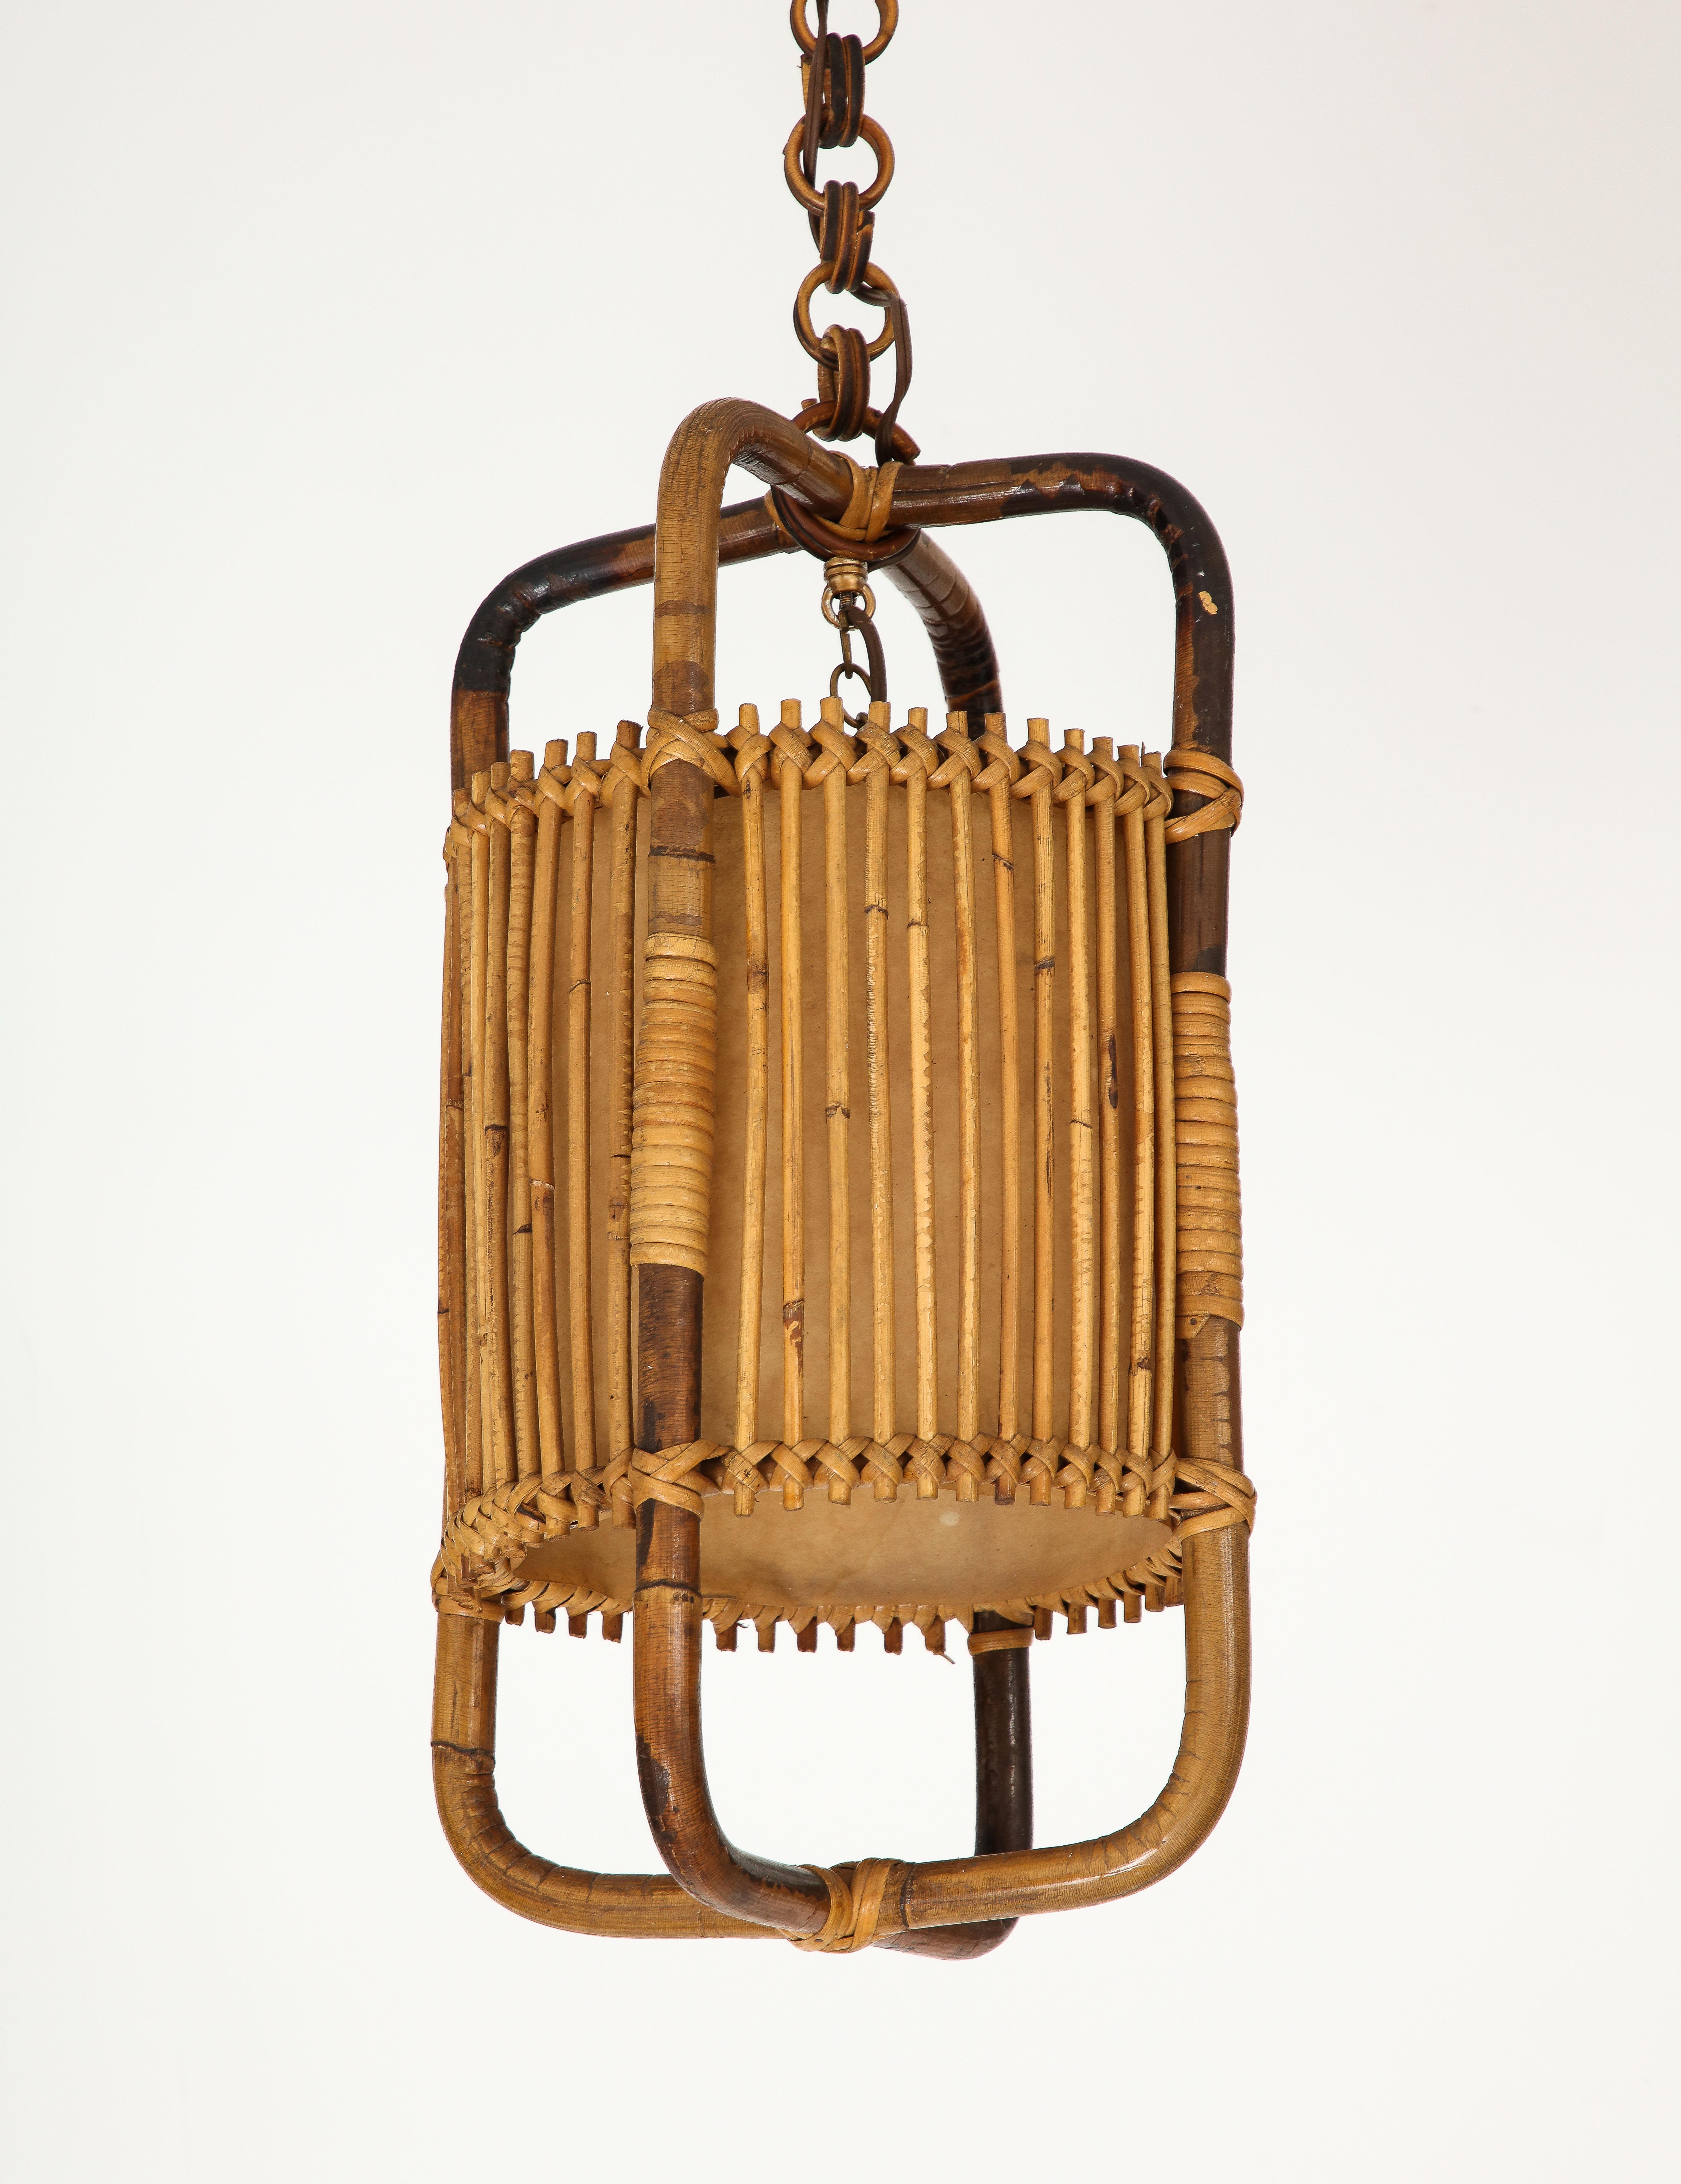 Italian 1950's charming bamboo and rattan lantern / pendant, entirely handcrafted with rattan, bamboo and wicker. The fixture is supported by a chain with round rattan links and rattan circular canopy; all original. With inner parchment to diffuse a